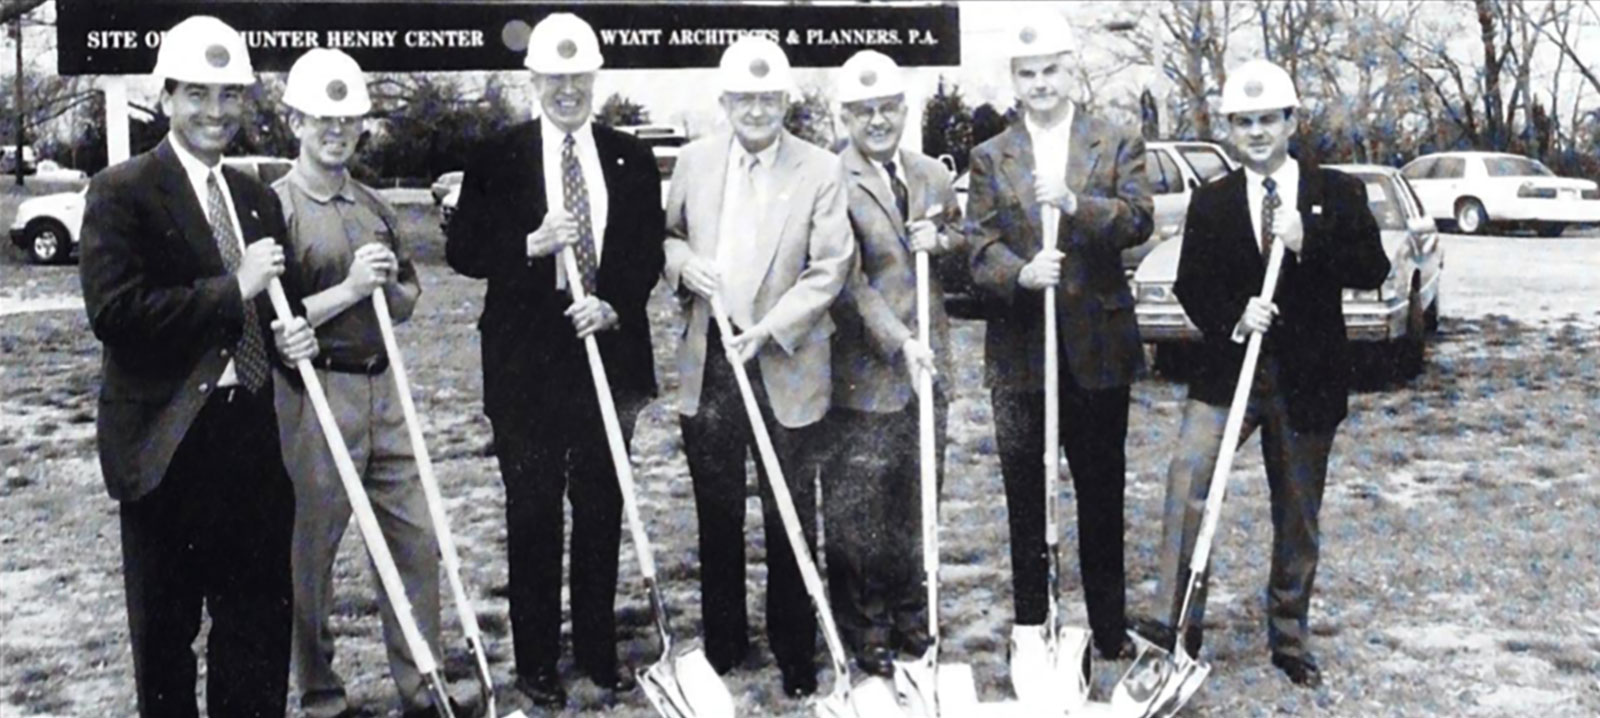 A group of men holding shovels in front of a building.